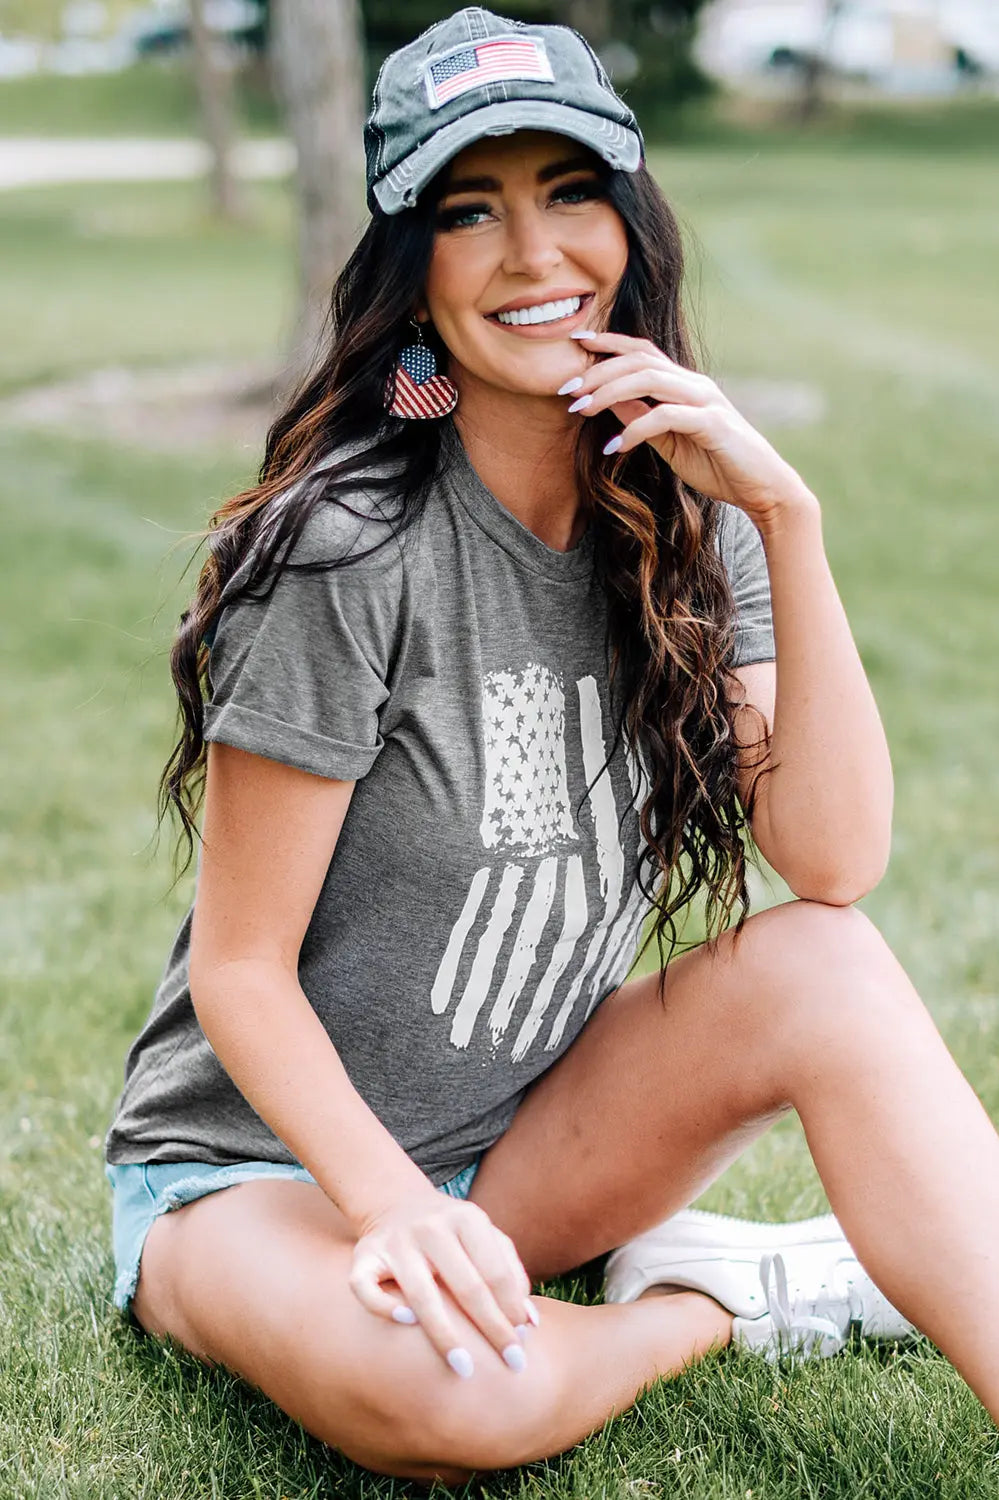 US Flag Graphic Cuffed Sleeve Tee Casual Chic Boutique